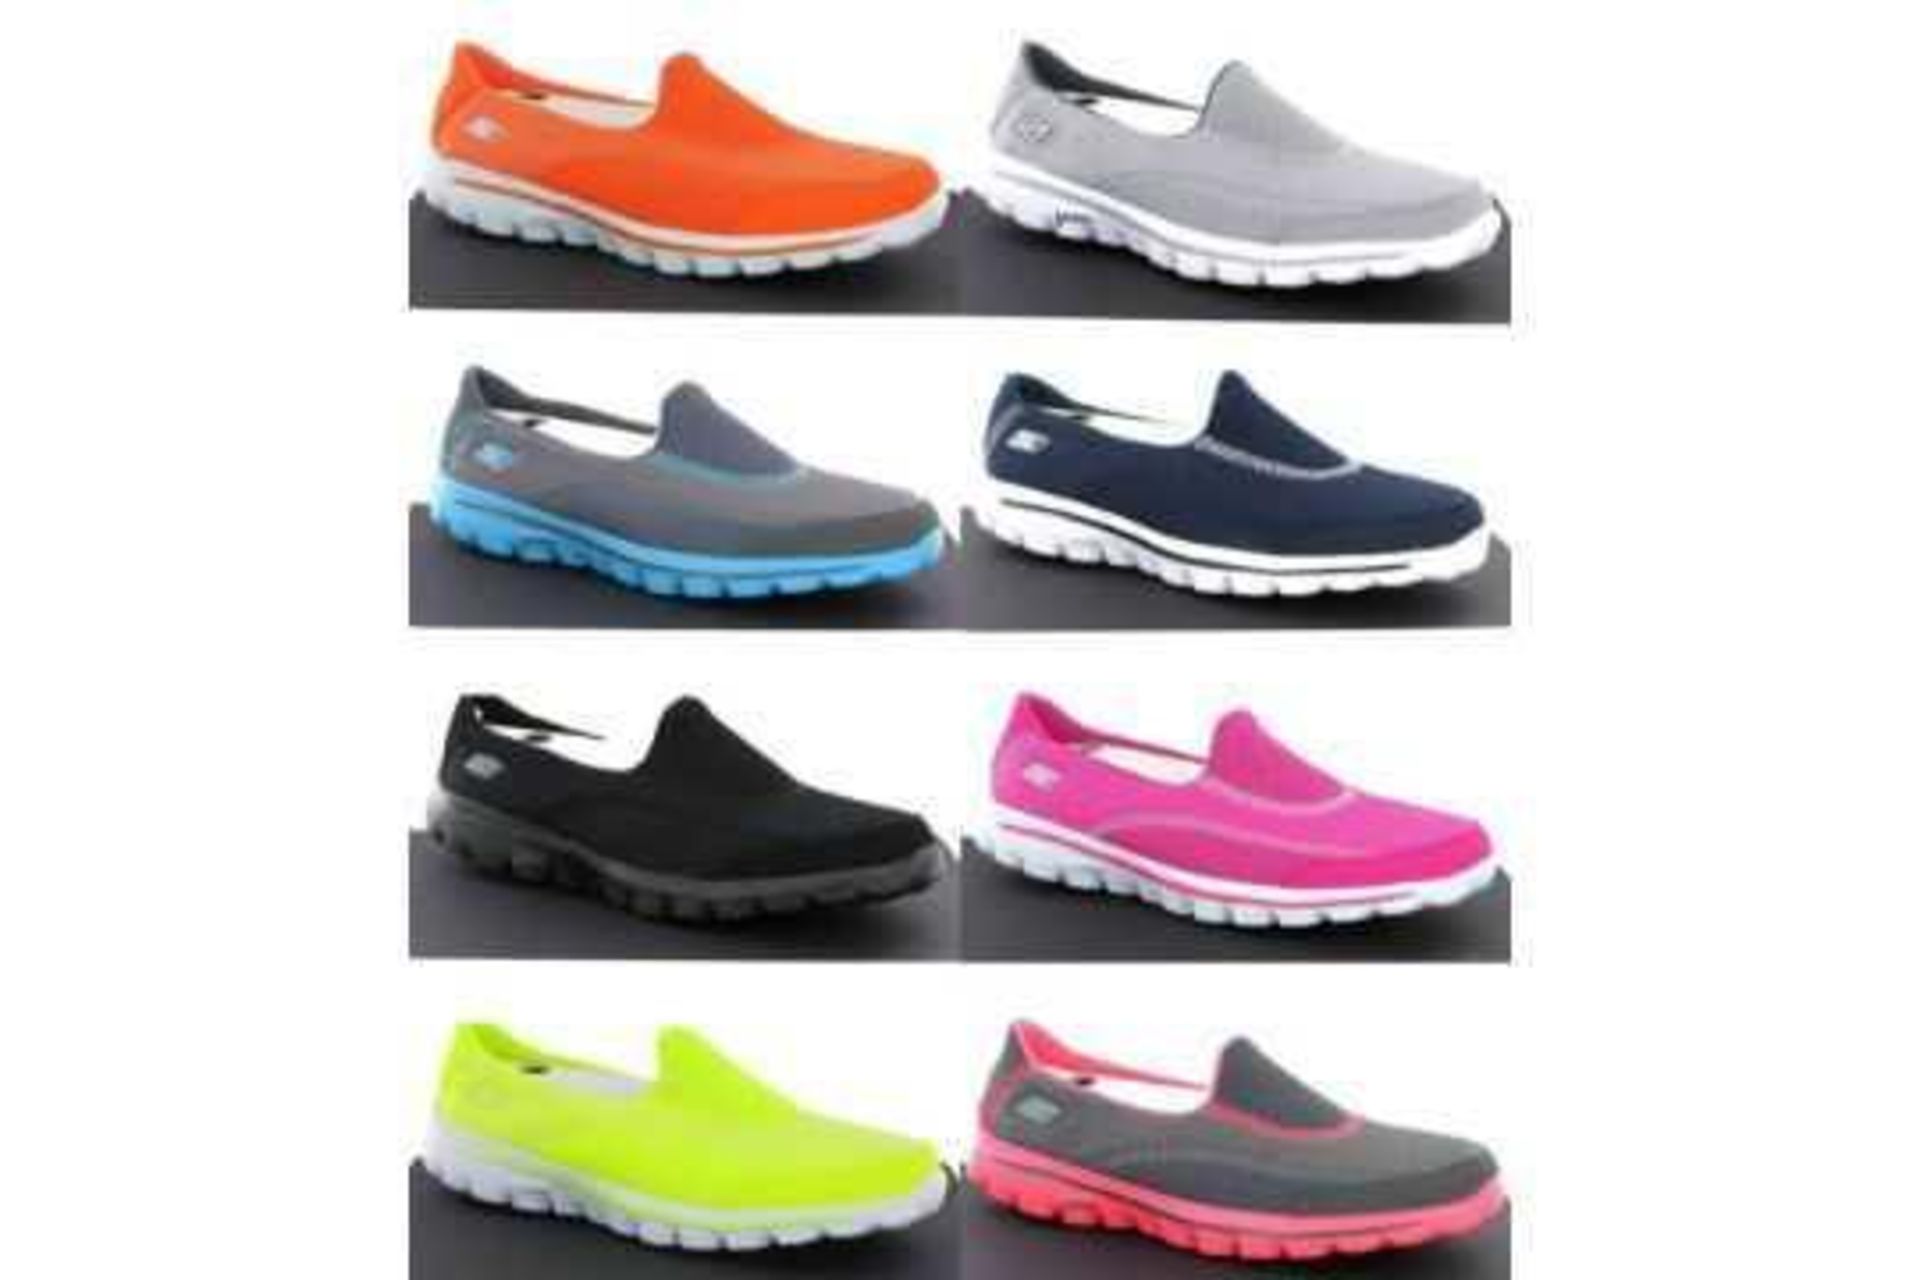 RRP £200 Lot To Contain 4 Boxed Pairs Of Skechers Designer Assorted Footwear In A Range Of Designs C